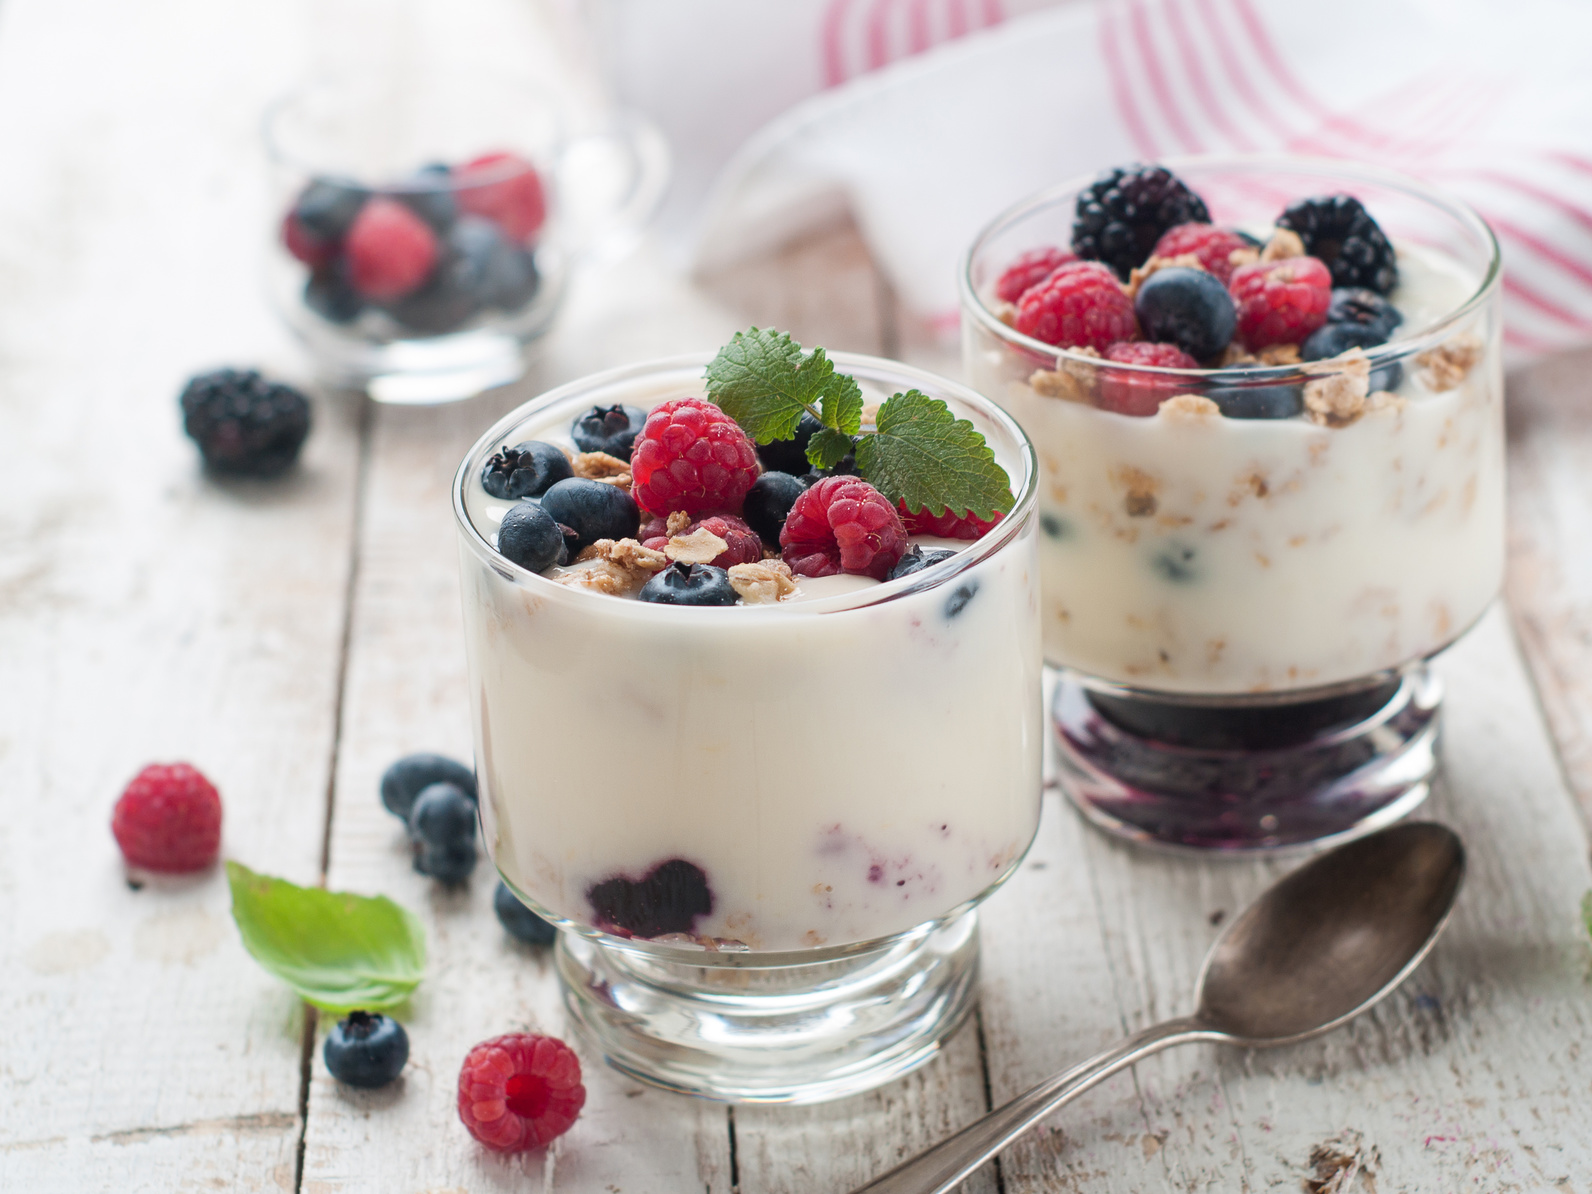 Yogurt with granola or muesli and fresh  berries for healthy morning meal, selective focus